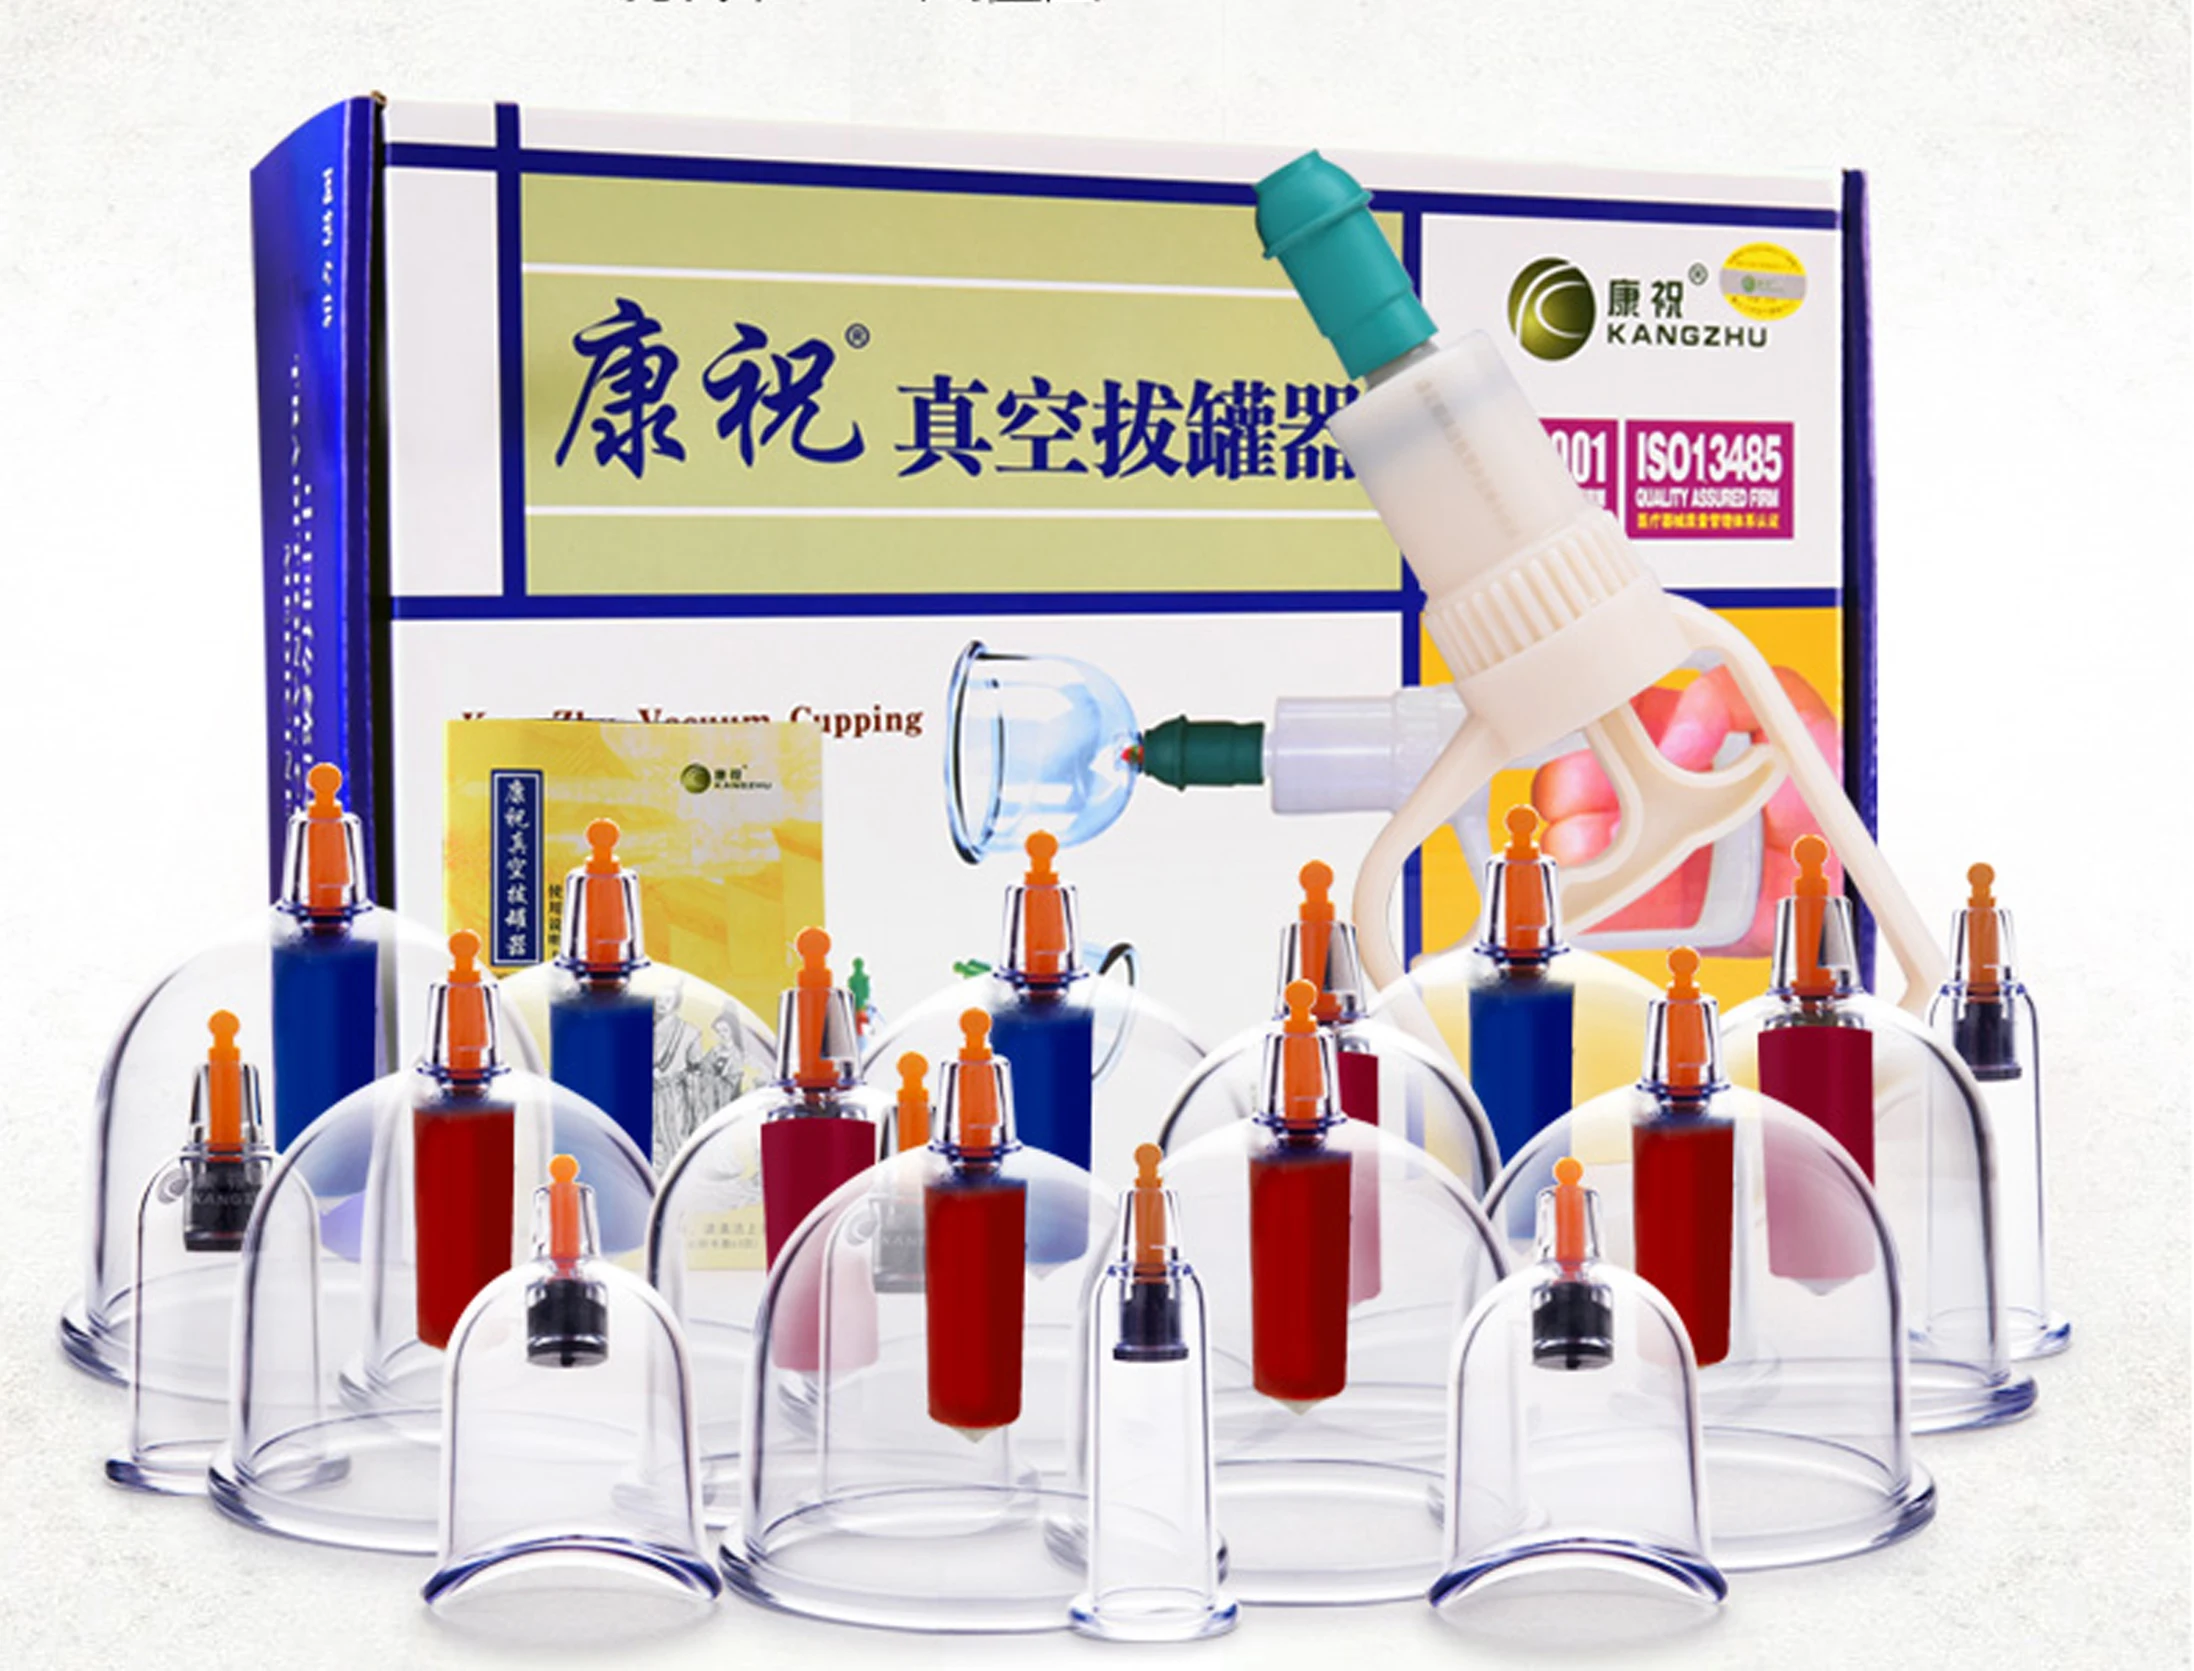 Chinese Traditional Cupping Therapy Cups Kangzhu Vacuum Cupping Device Buy Kangzhu Cupping